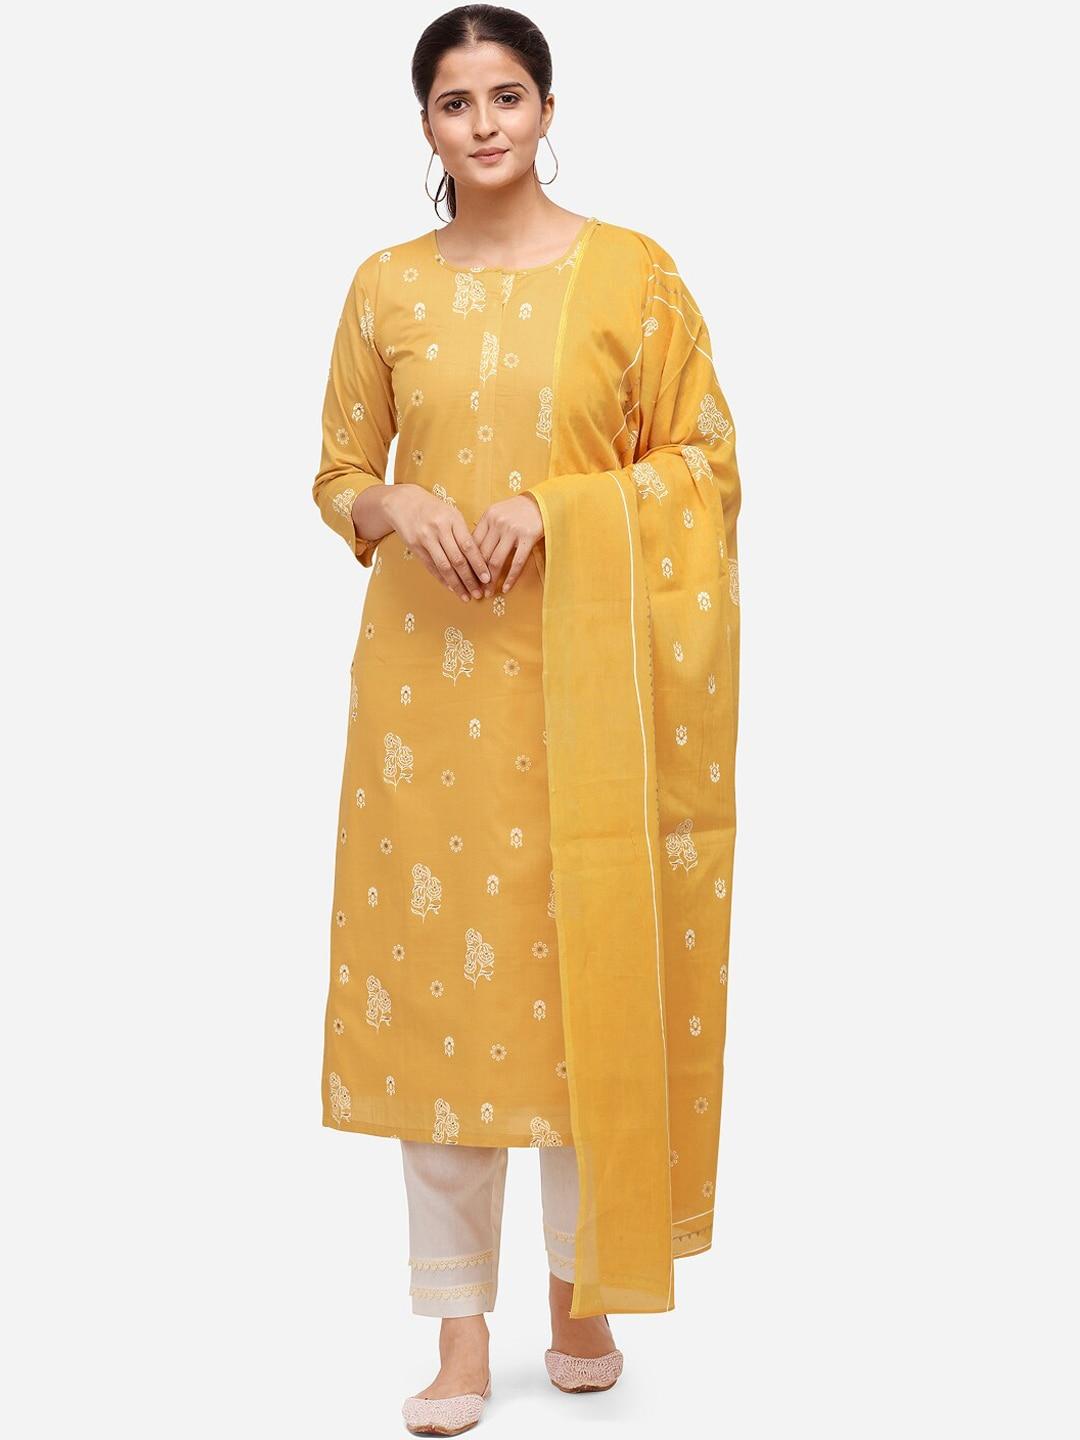 kvsfab-mustard-yellow-&-off-white-cotton-blend-unstitched-dress-material